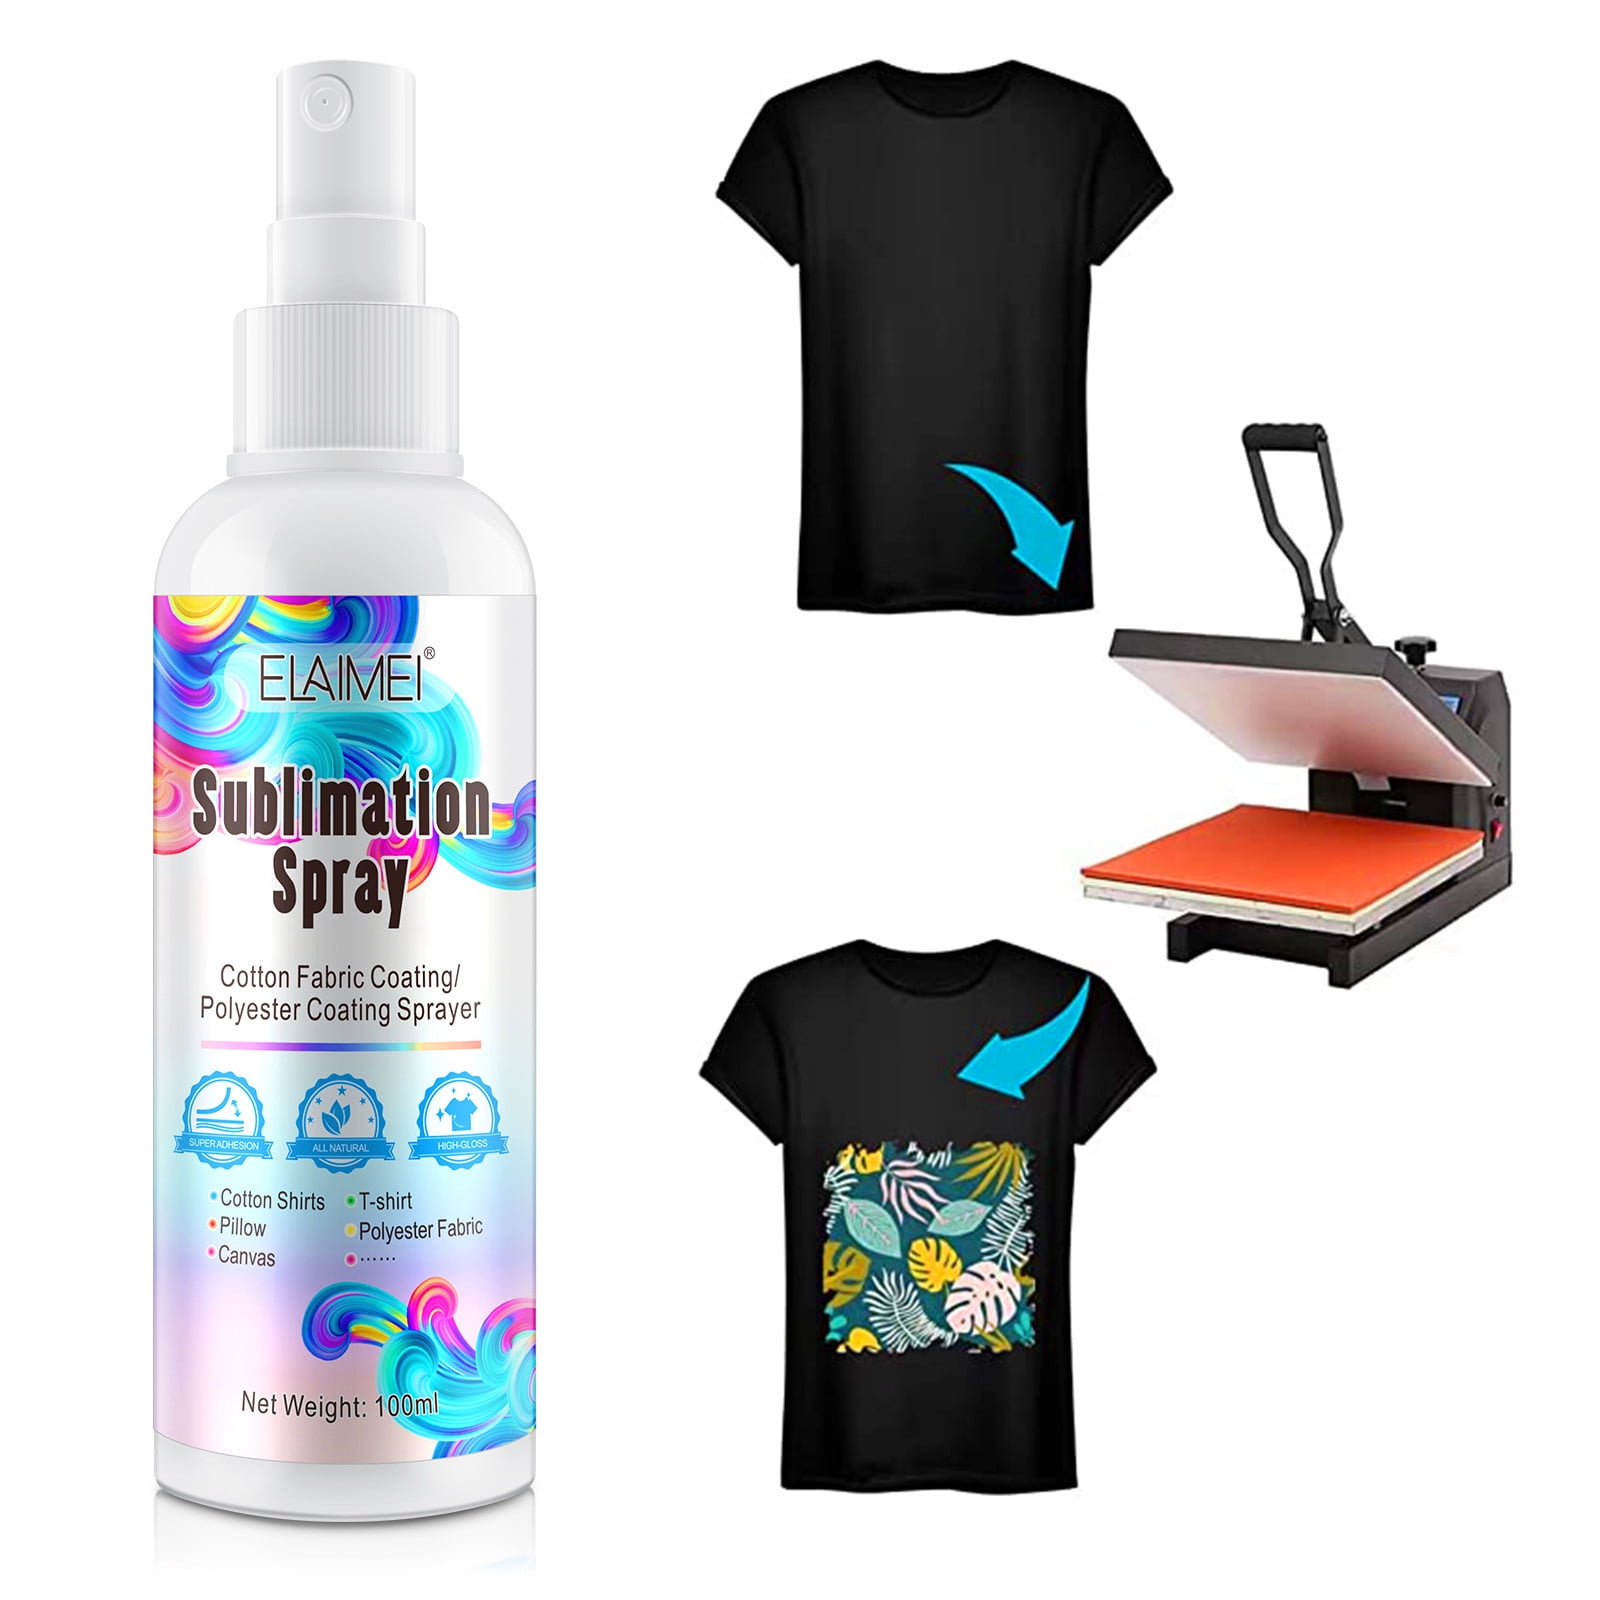 Sublimation Spray Adhesive: How Does it Work? Should You Use It? 